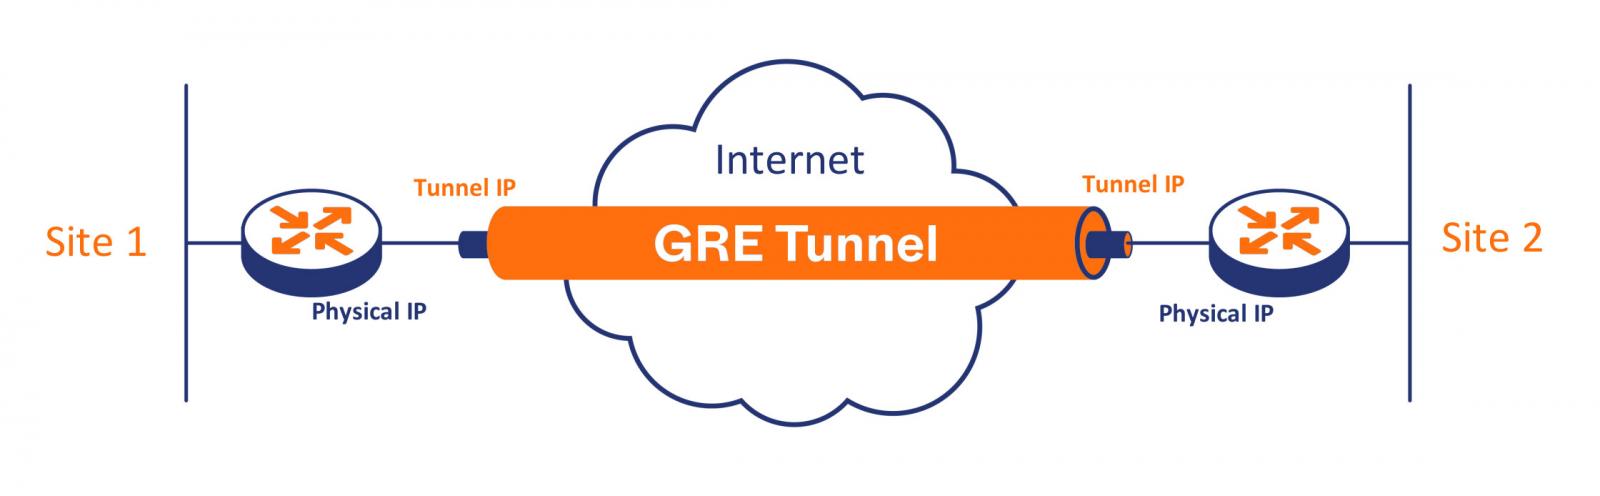 A GRE Tunnel